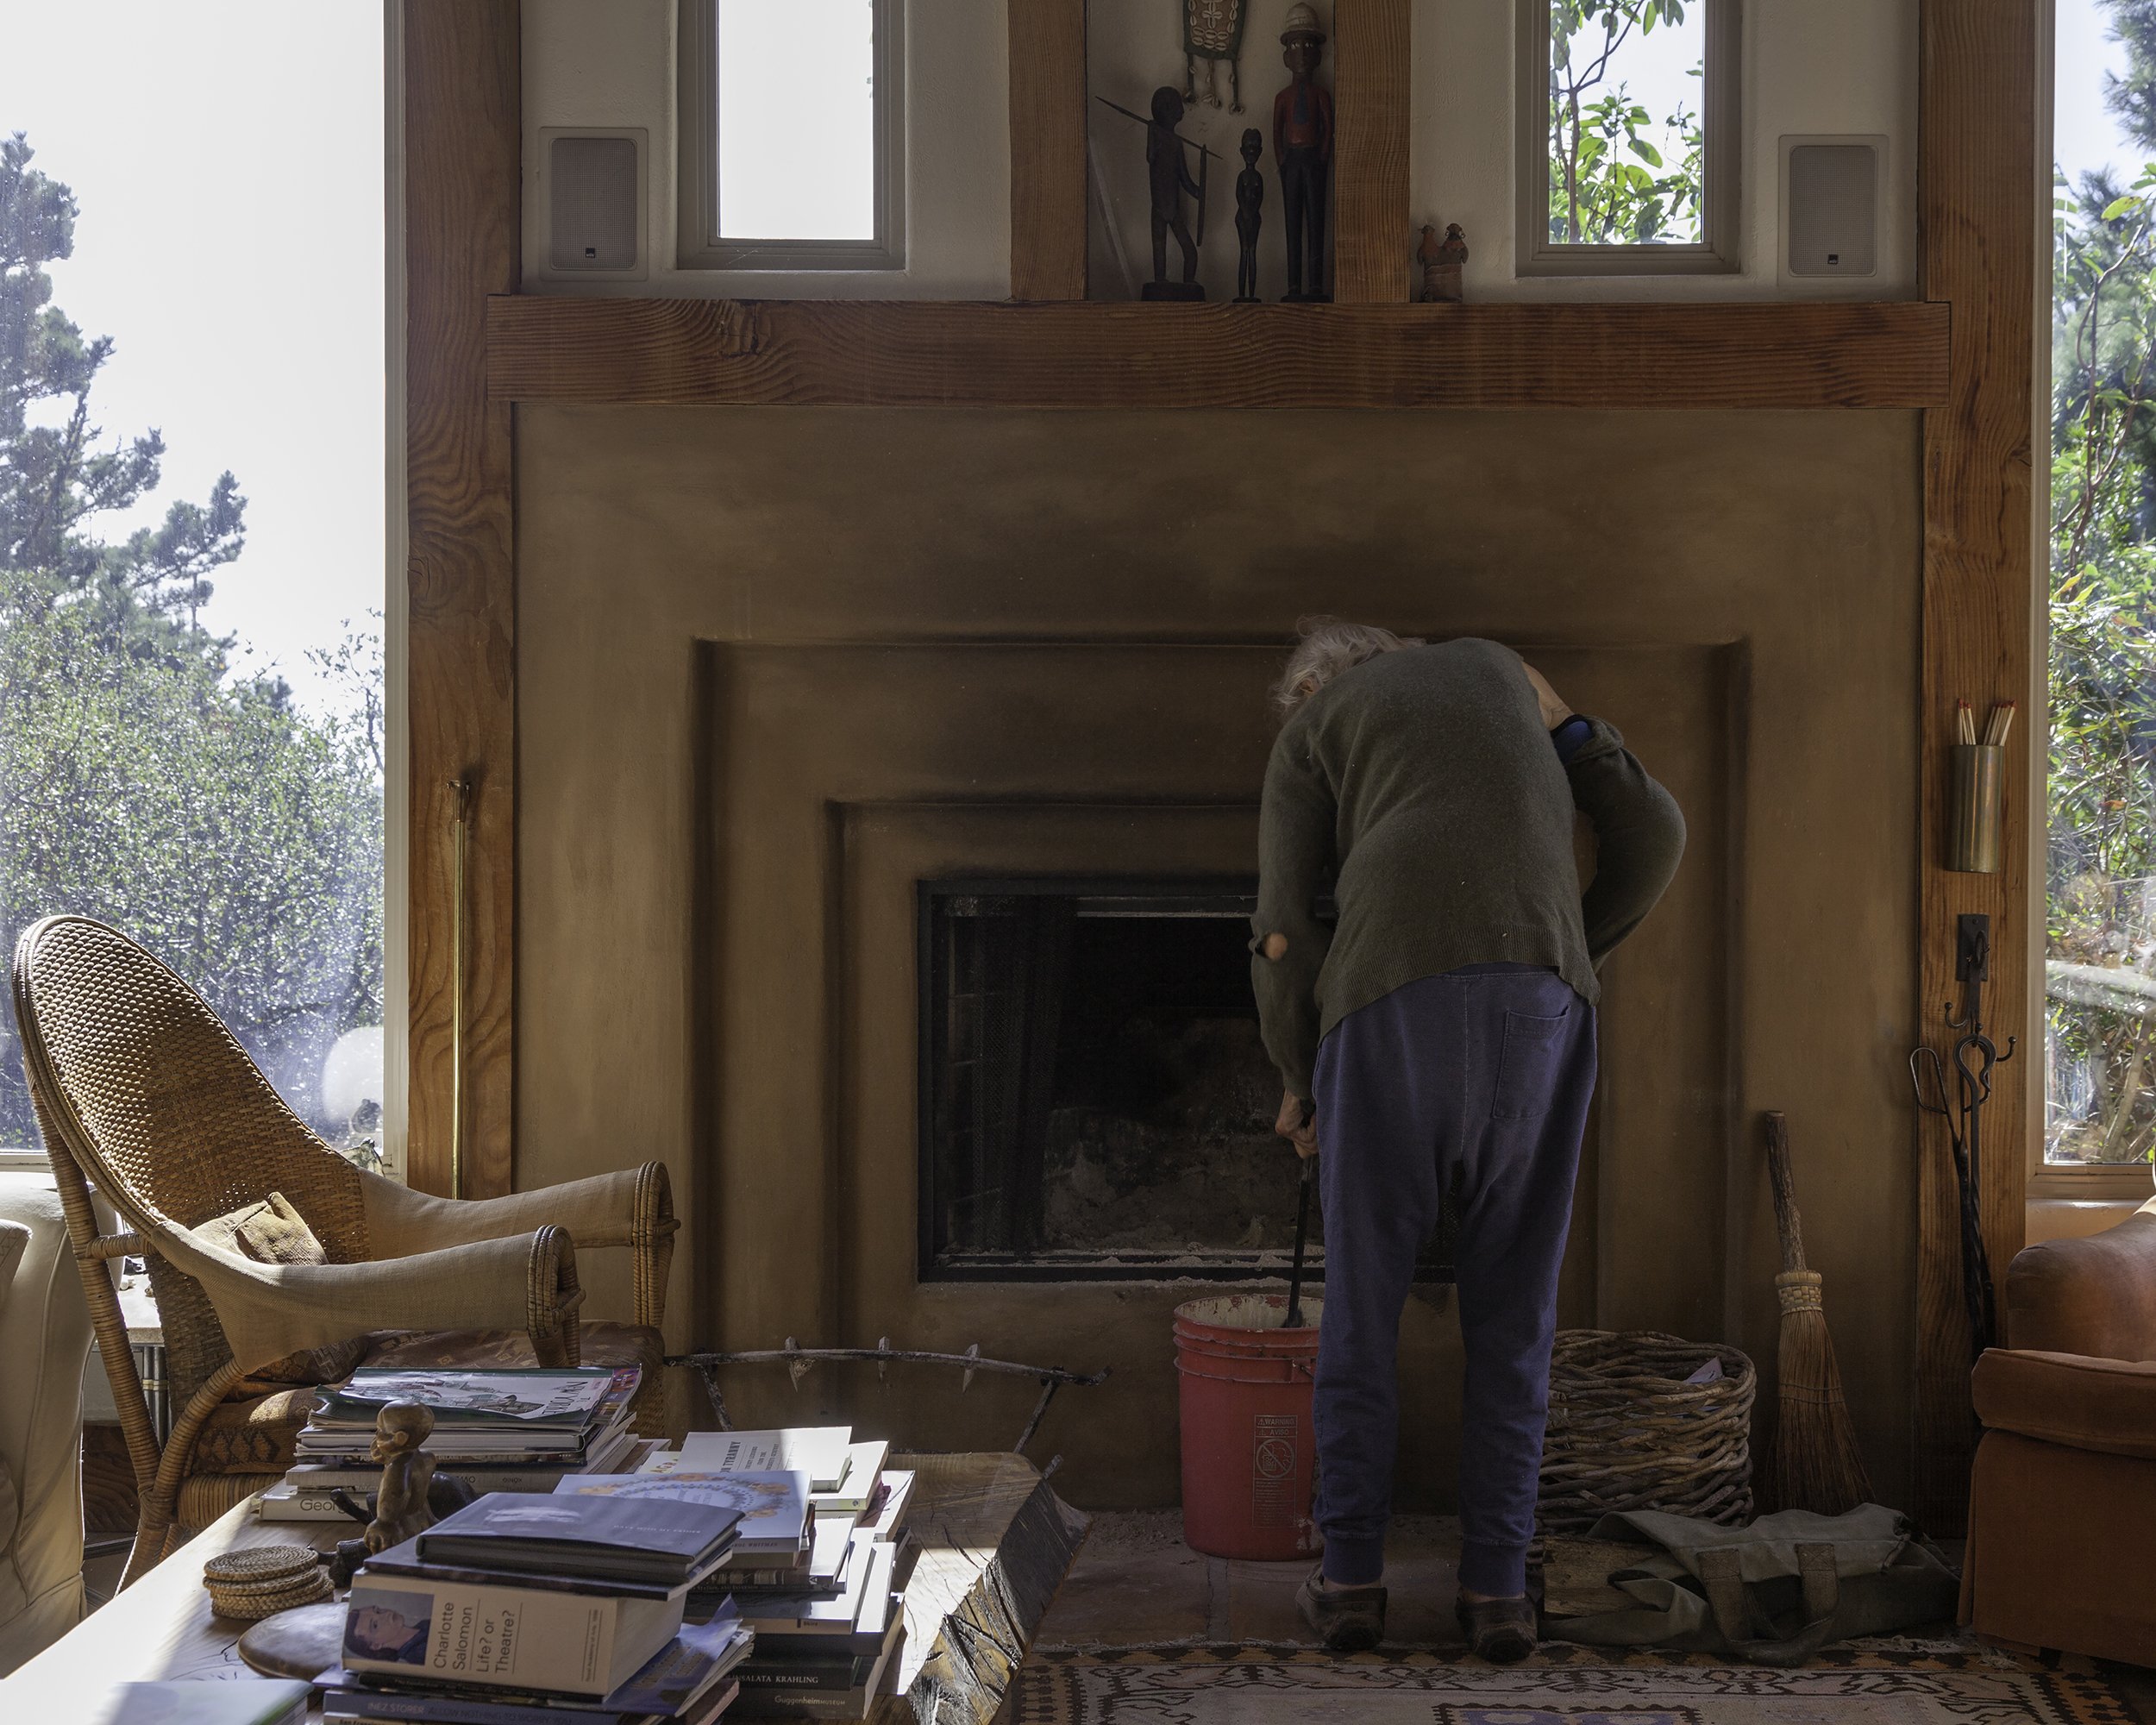  Marna Clarke,  Cleaning Fireplace , 2021, archival digital print, courtesy and copyright of the artist. 